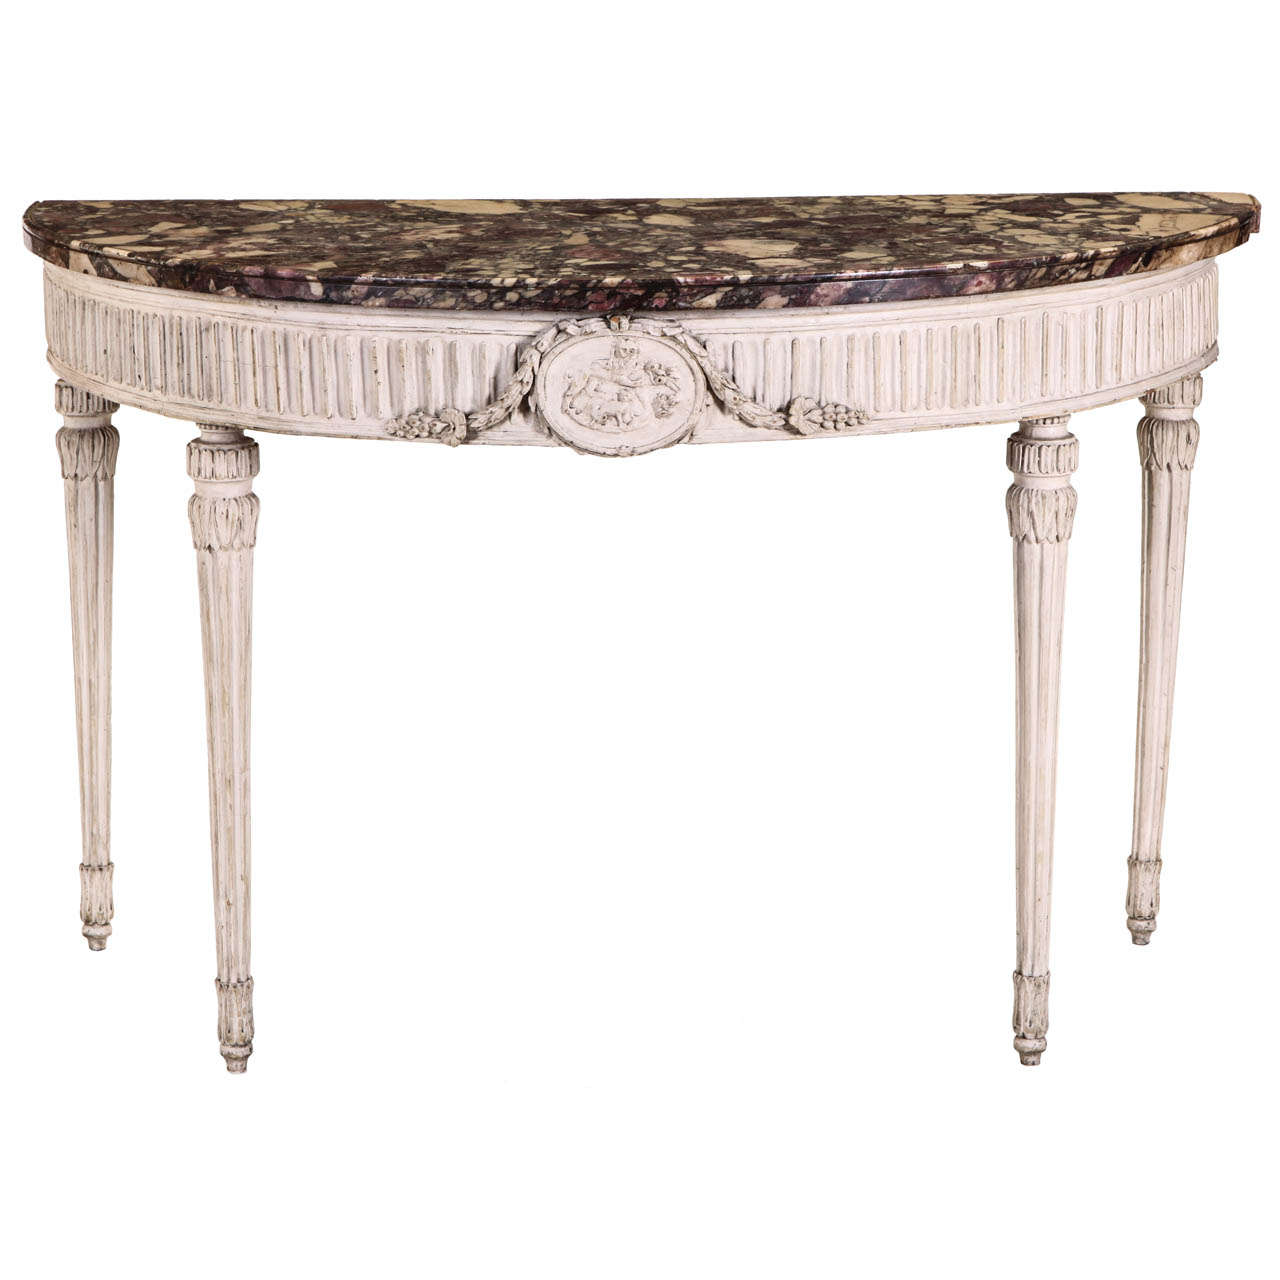  Italian 18' century Demi-lune Ivory Painted Console Table Louis XVI period